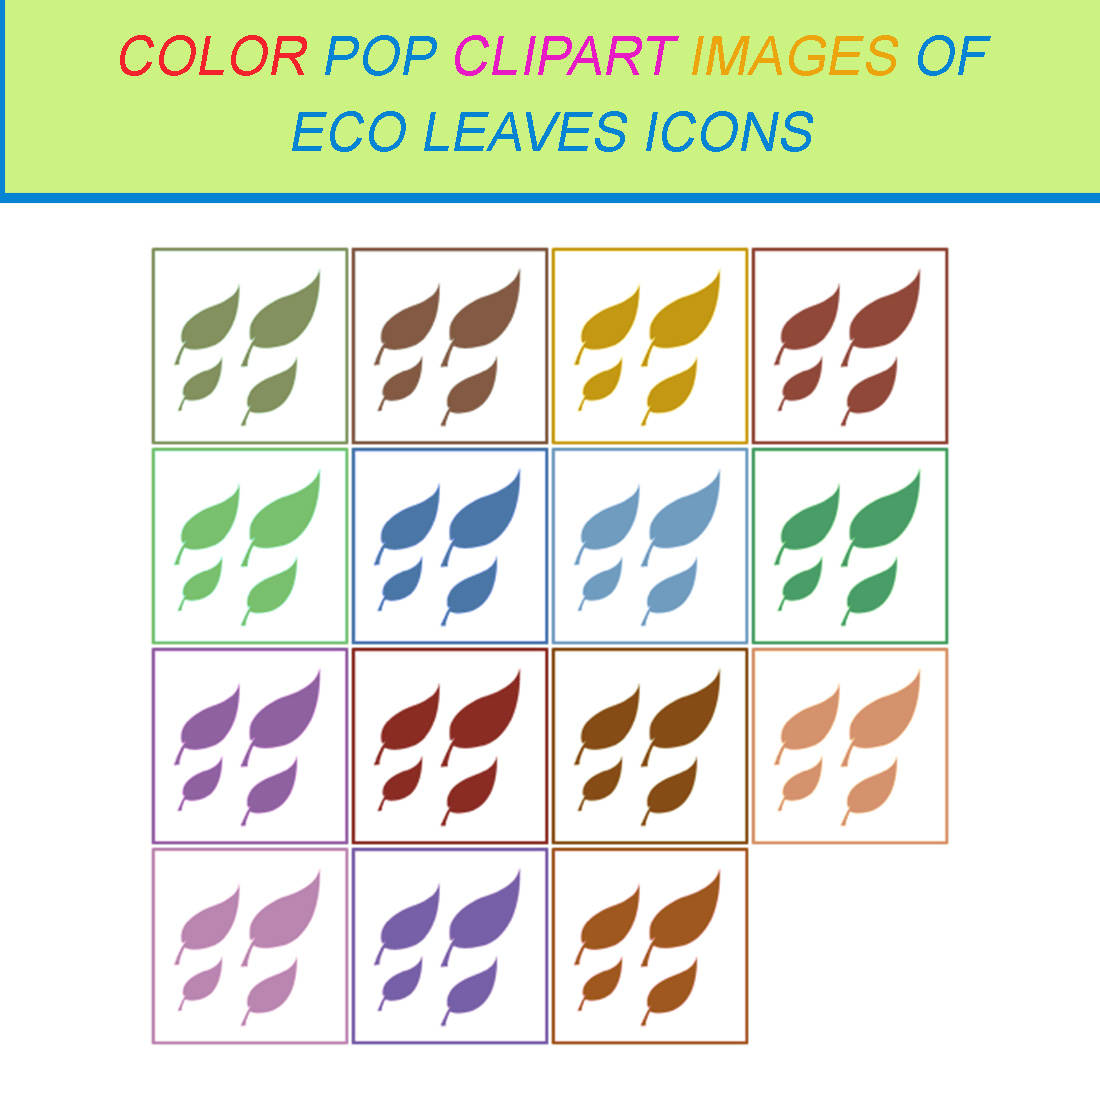 15 COLOR POP CLIPART IMAGES OF ECO LEAVES ICONS cover image.